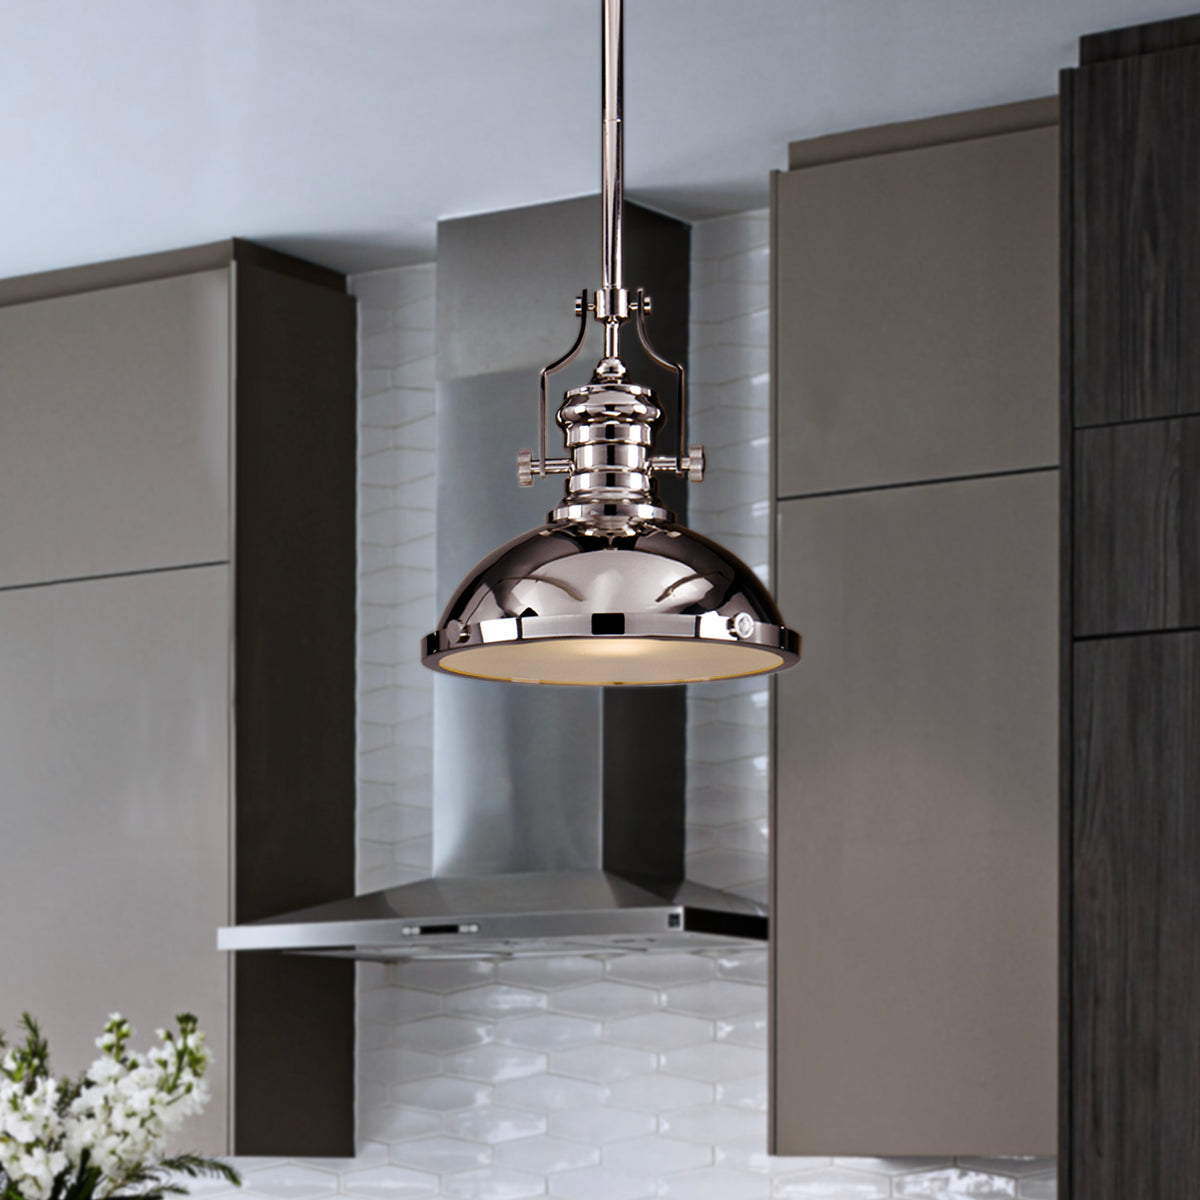 OPEN BOX-Industrial Polished Nickel Dome Pendant Light for Kitchen Island